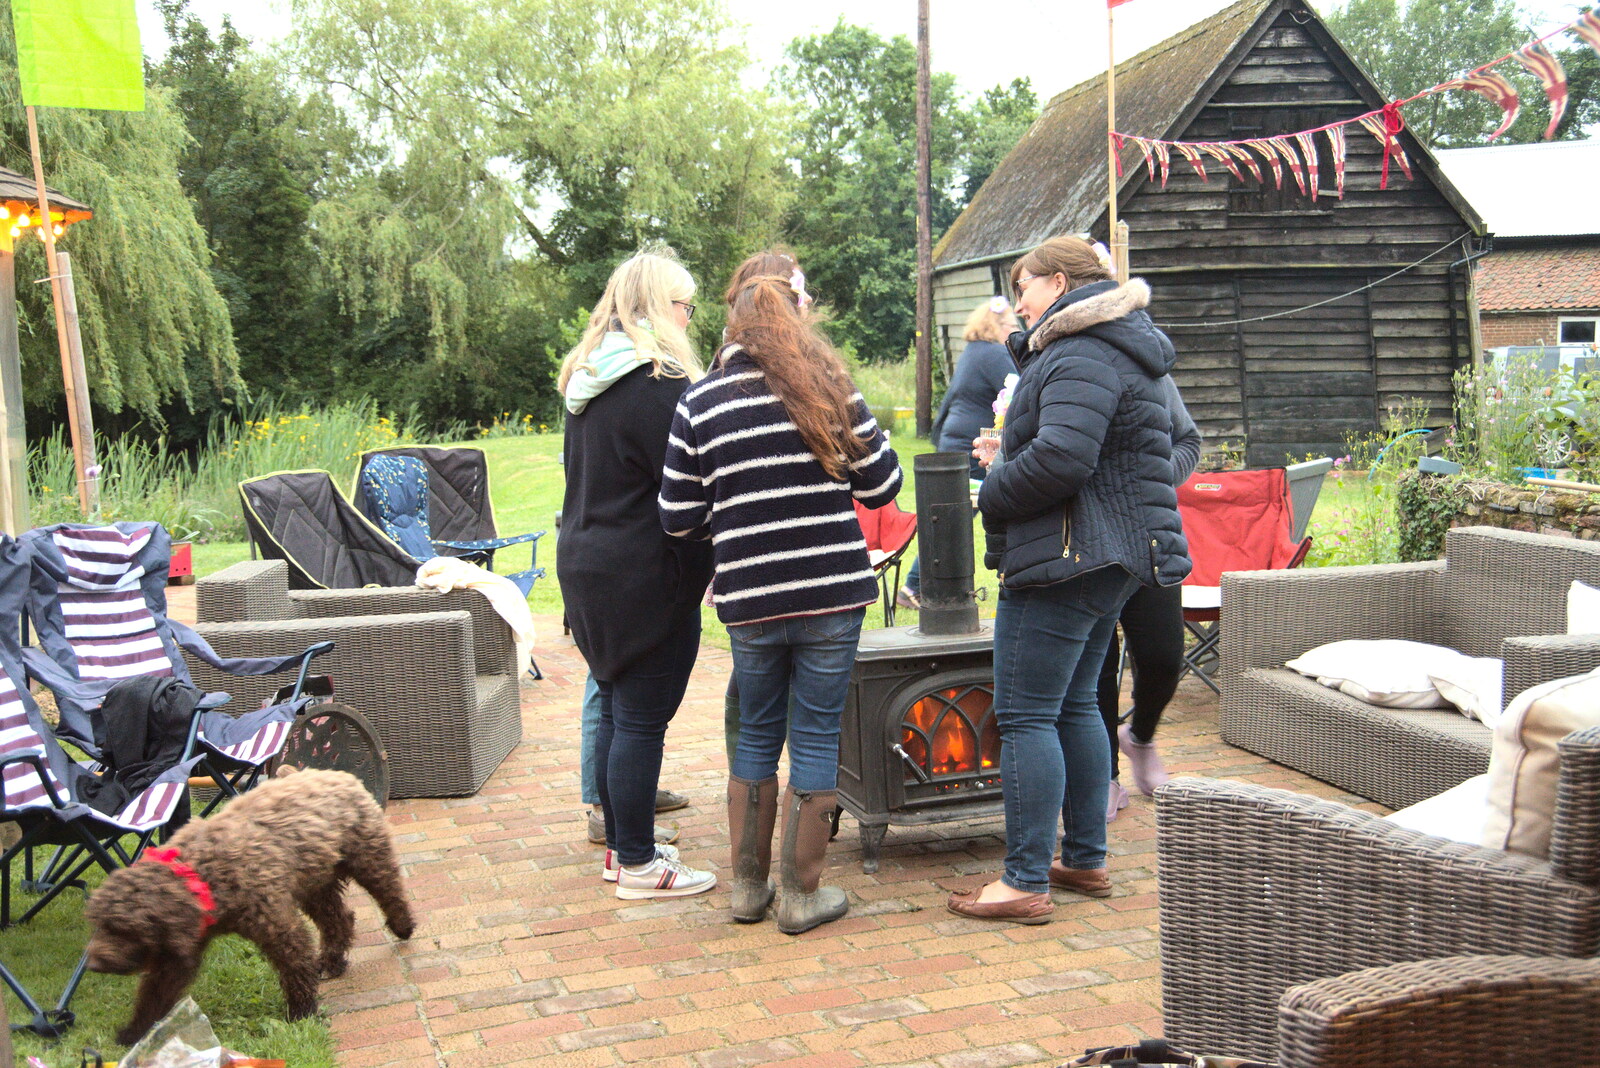 Gathering around the outdoor wood burner from Suze-fest, Braisworth, Suffolk - 19th June 2021